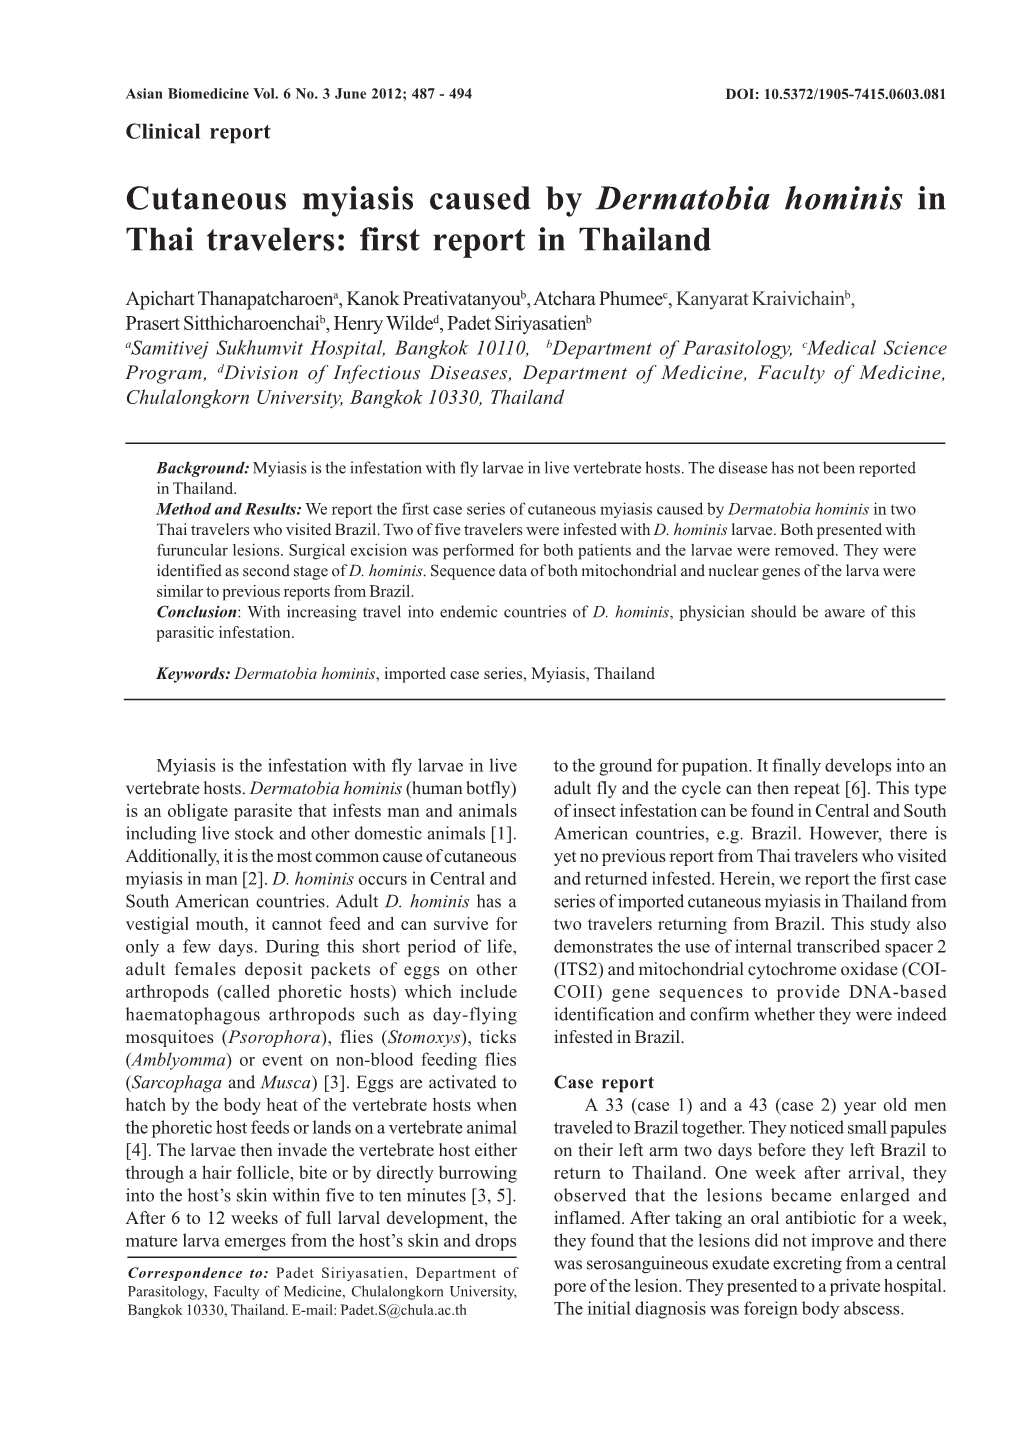 Cutaneous Myiasis Caused by Dermatobia Hominis in Thai Travelers: First Report in Thailand